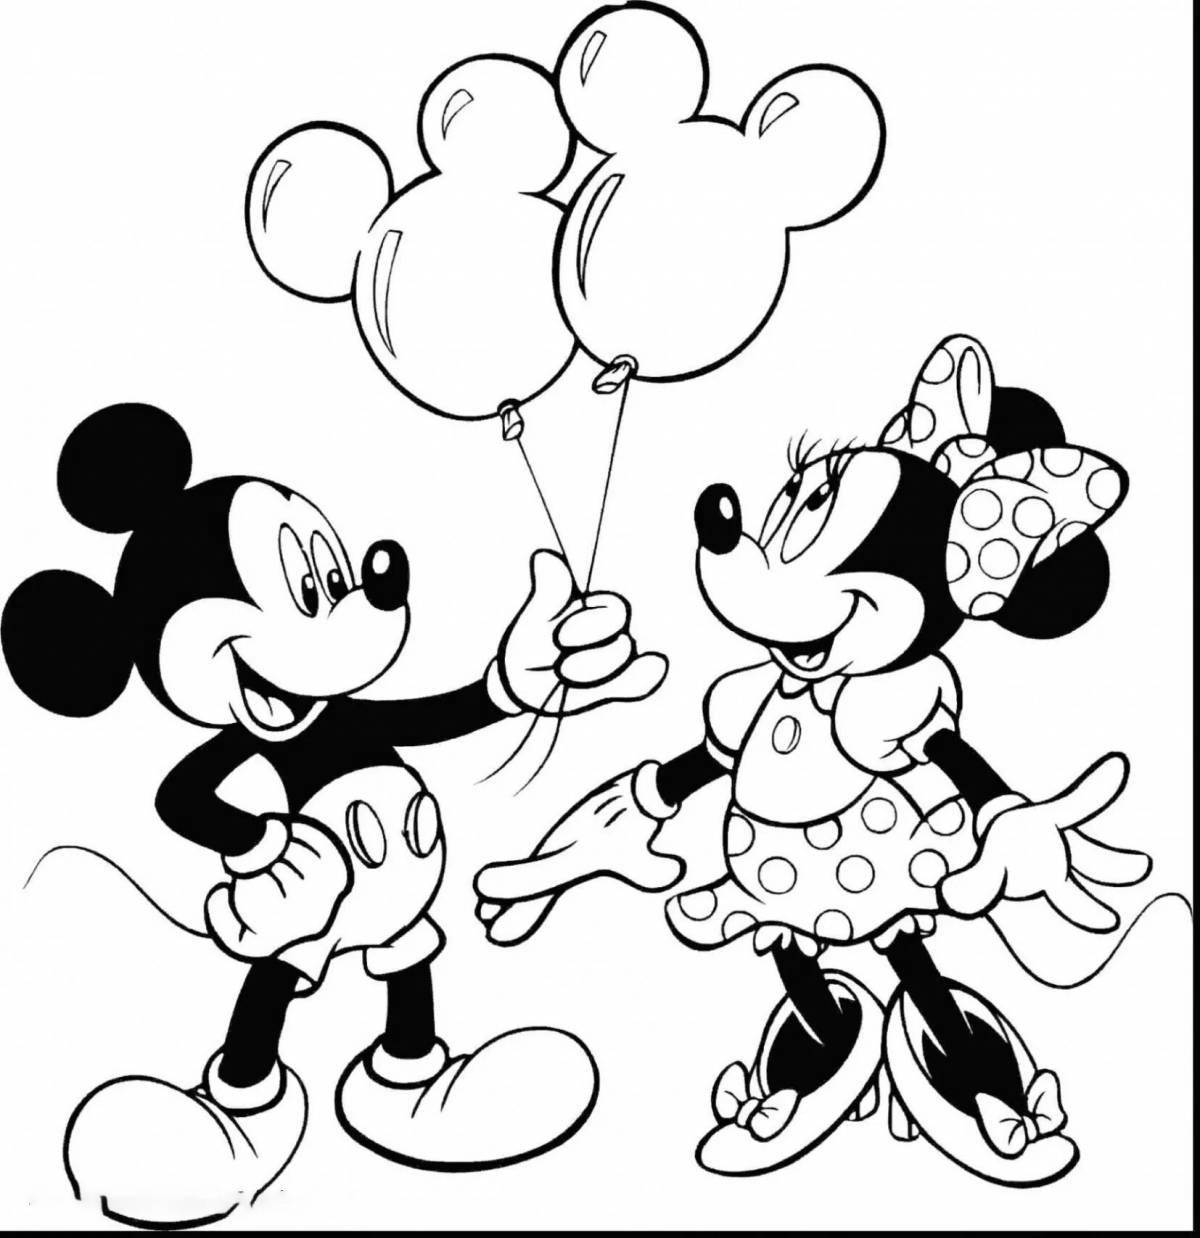 Mickey Mouse and Minnie Mouse #10